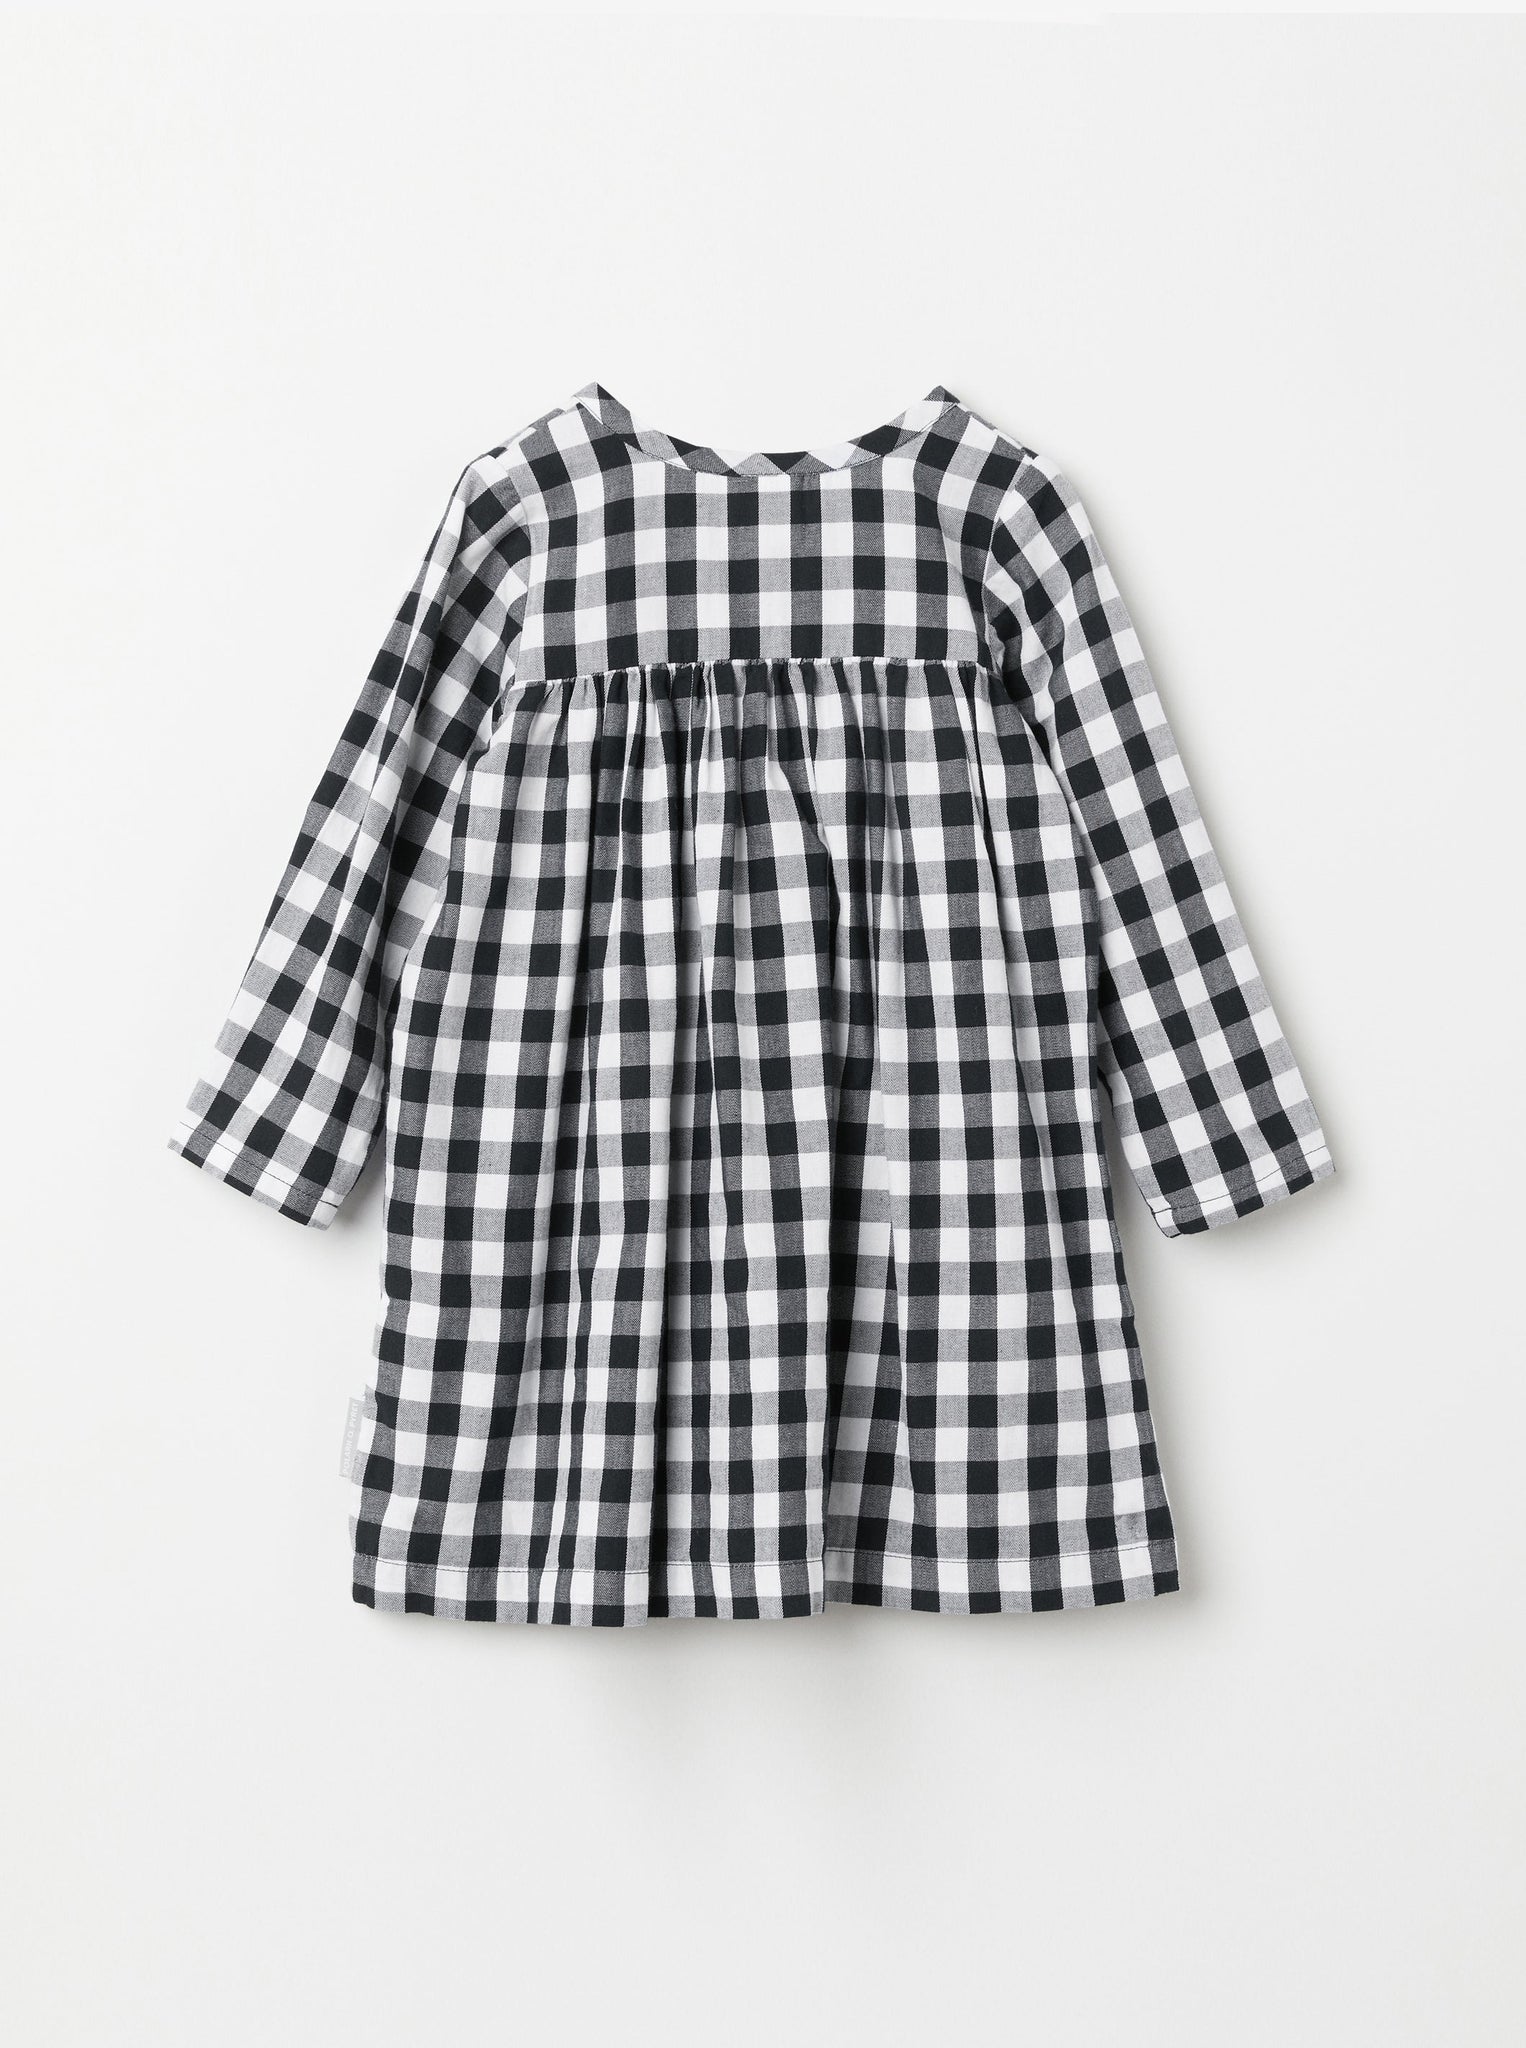 Organic Cotton Checked Baby Dress from the Polarn O. Pyret baby collection. Ethically produced baby clothing.